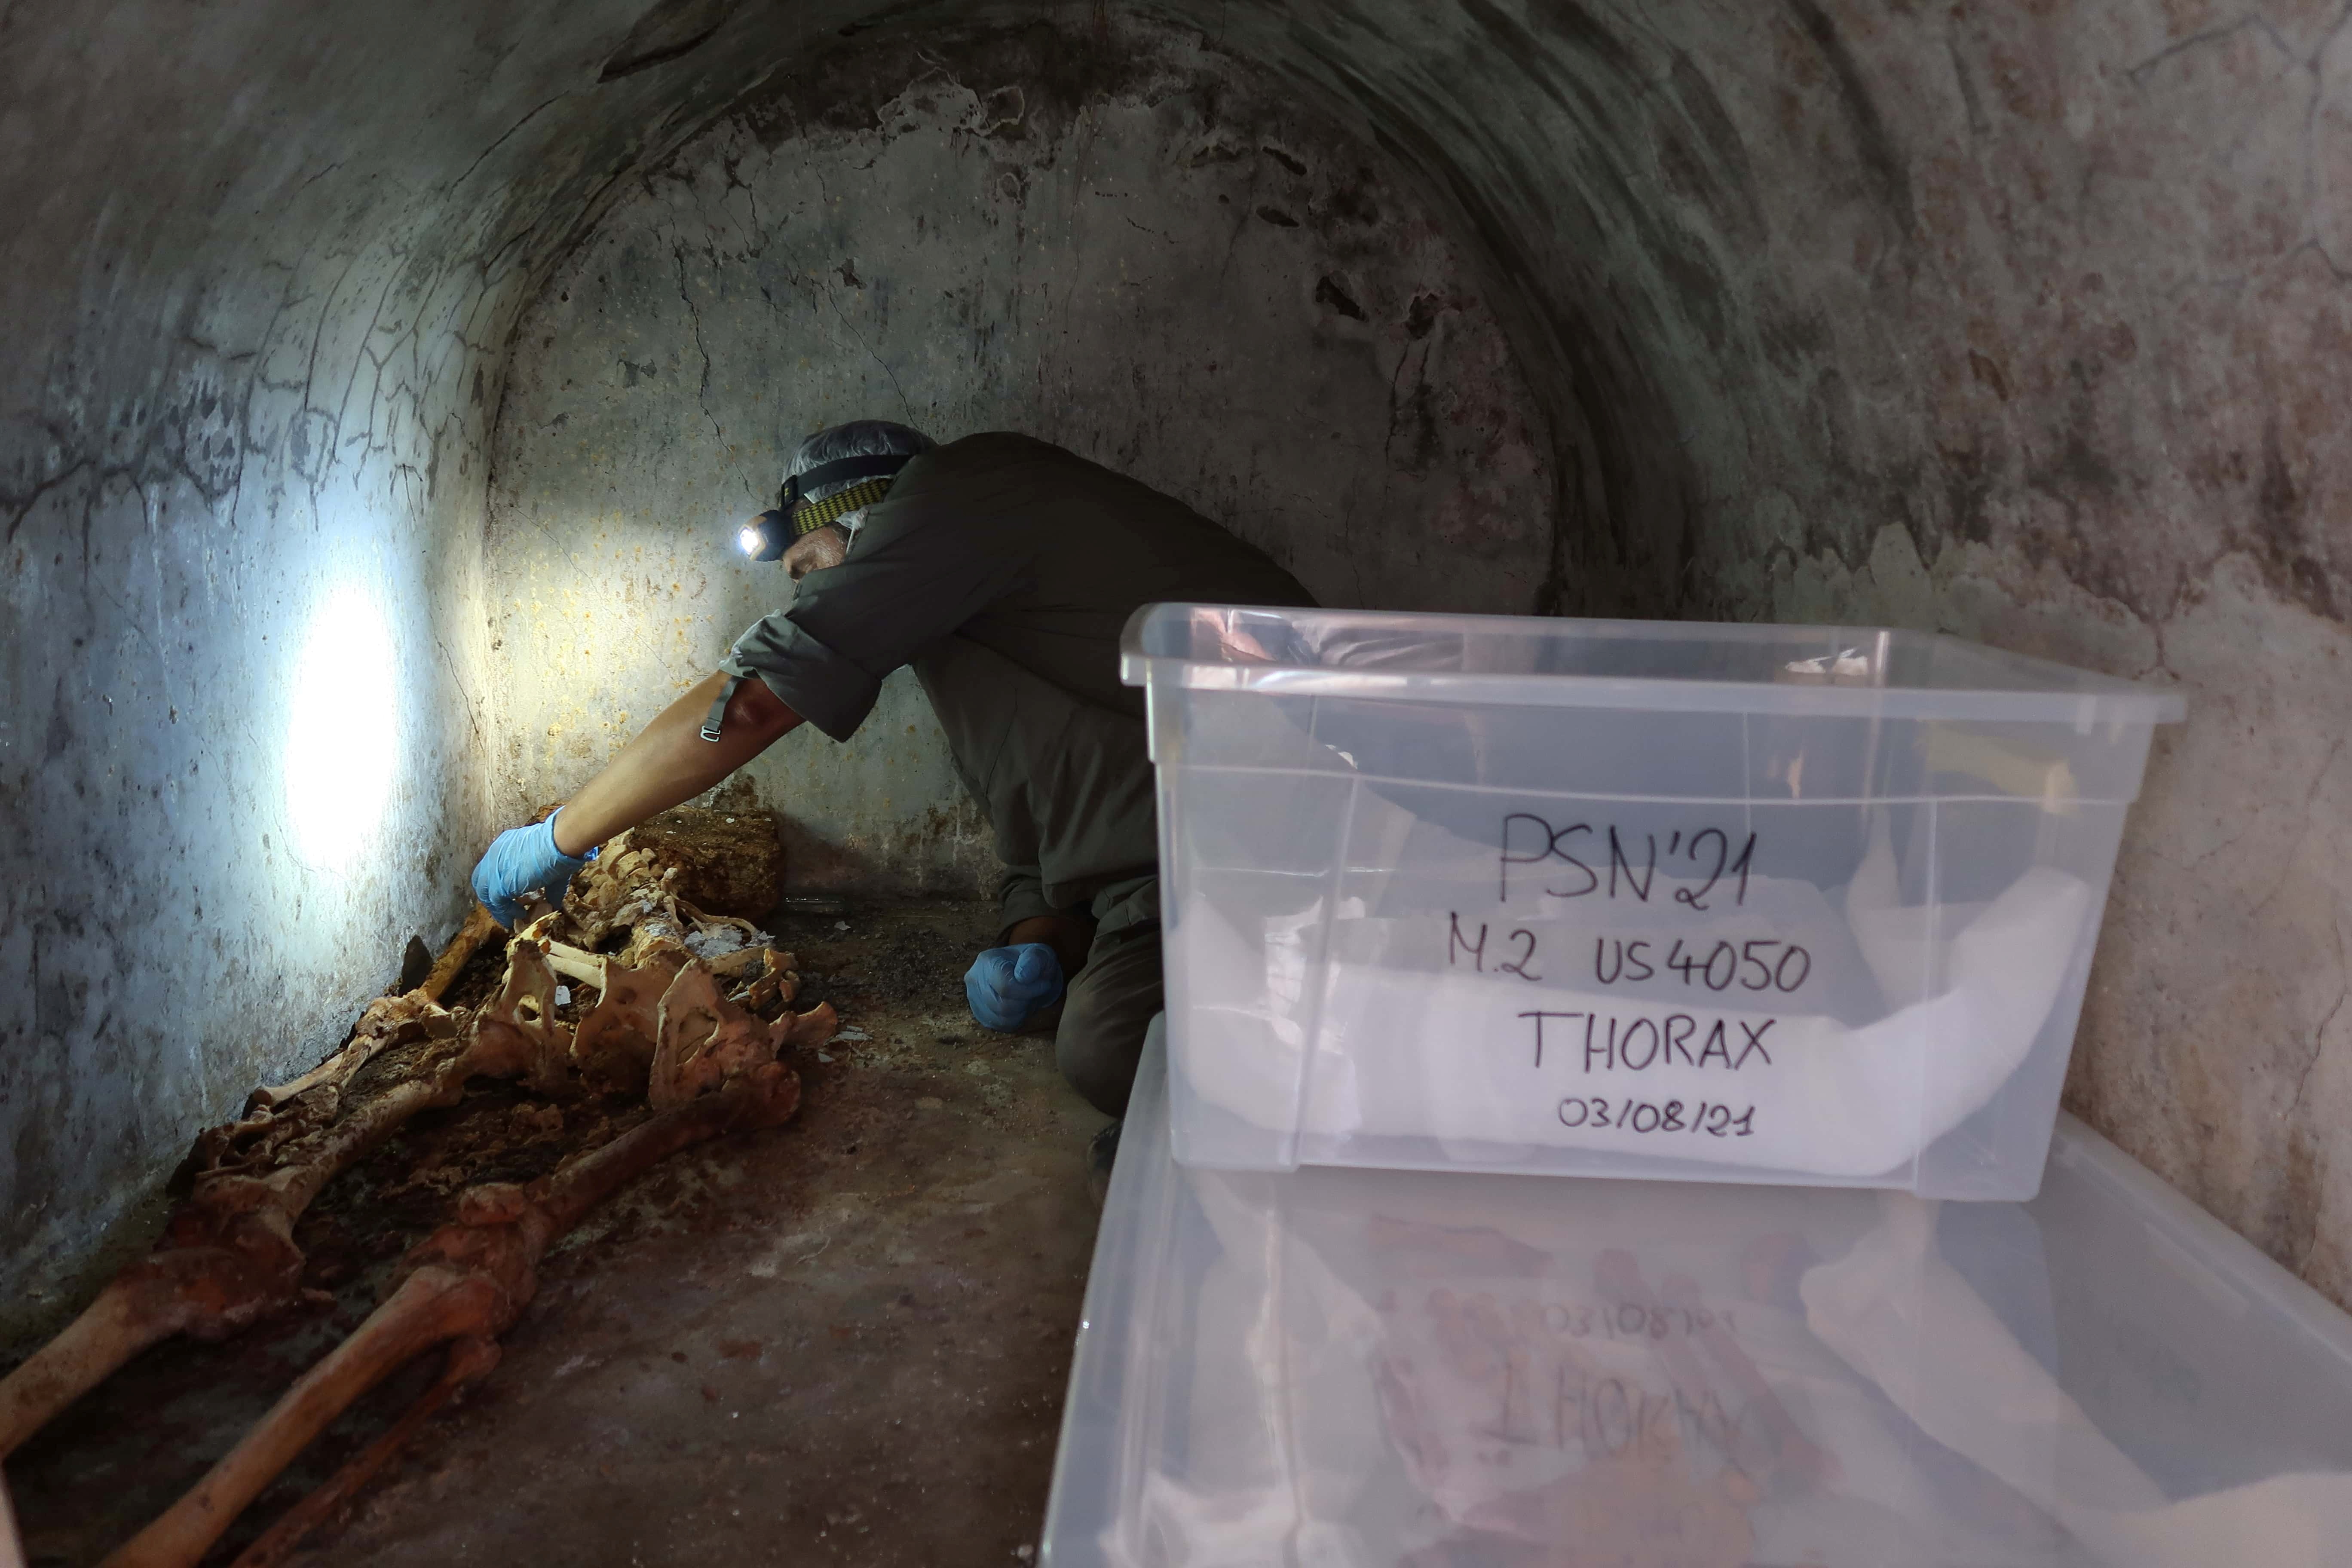 Well-preserved skeleton sheds light on culture in ancient Pompeii